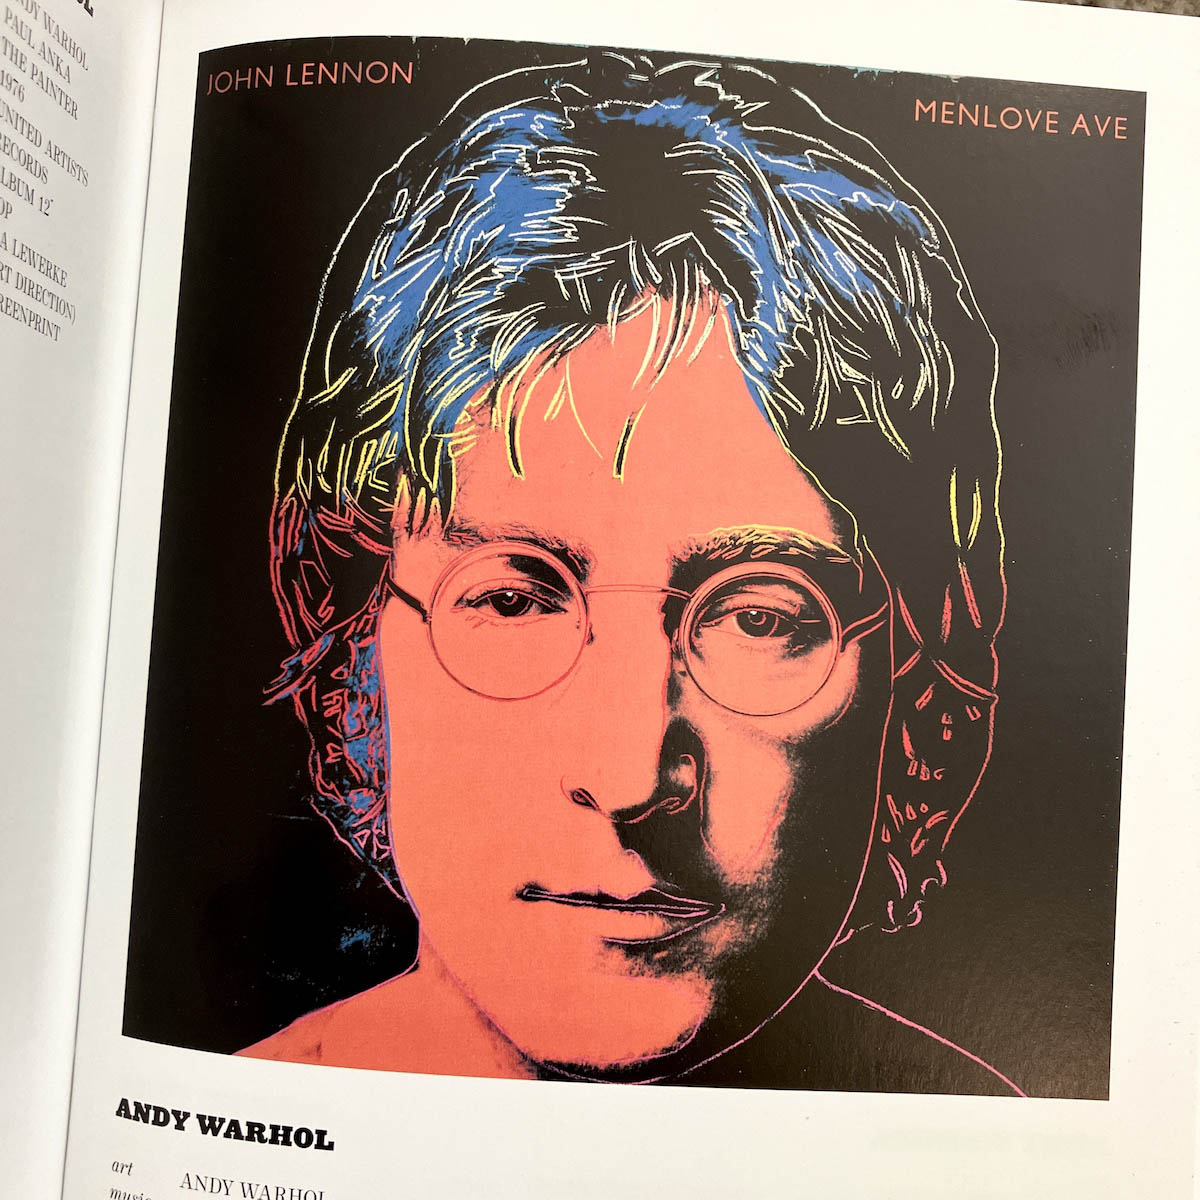 Andy Warhol album cover design for John Lennon | Photo By Kerwin